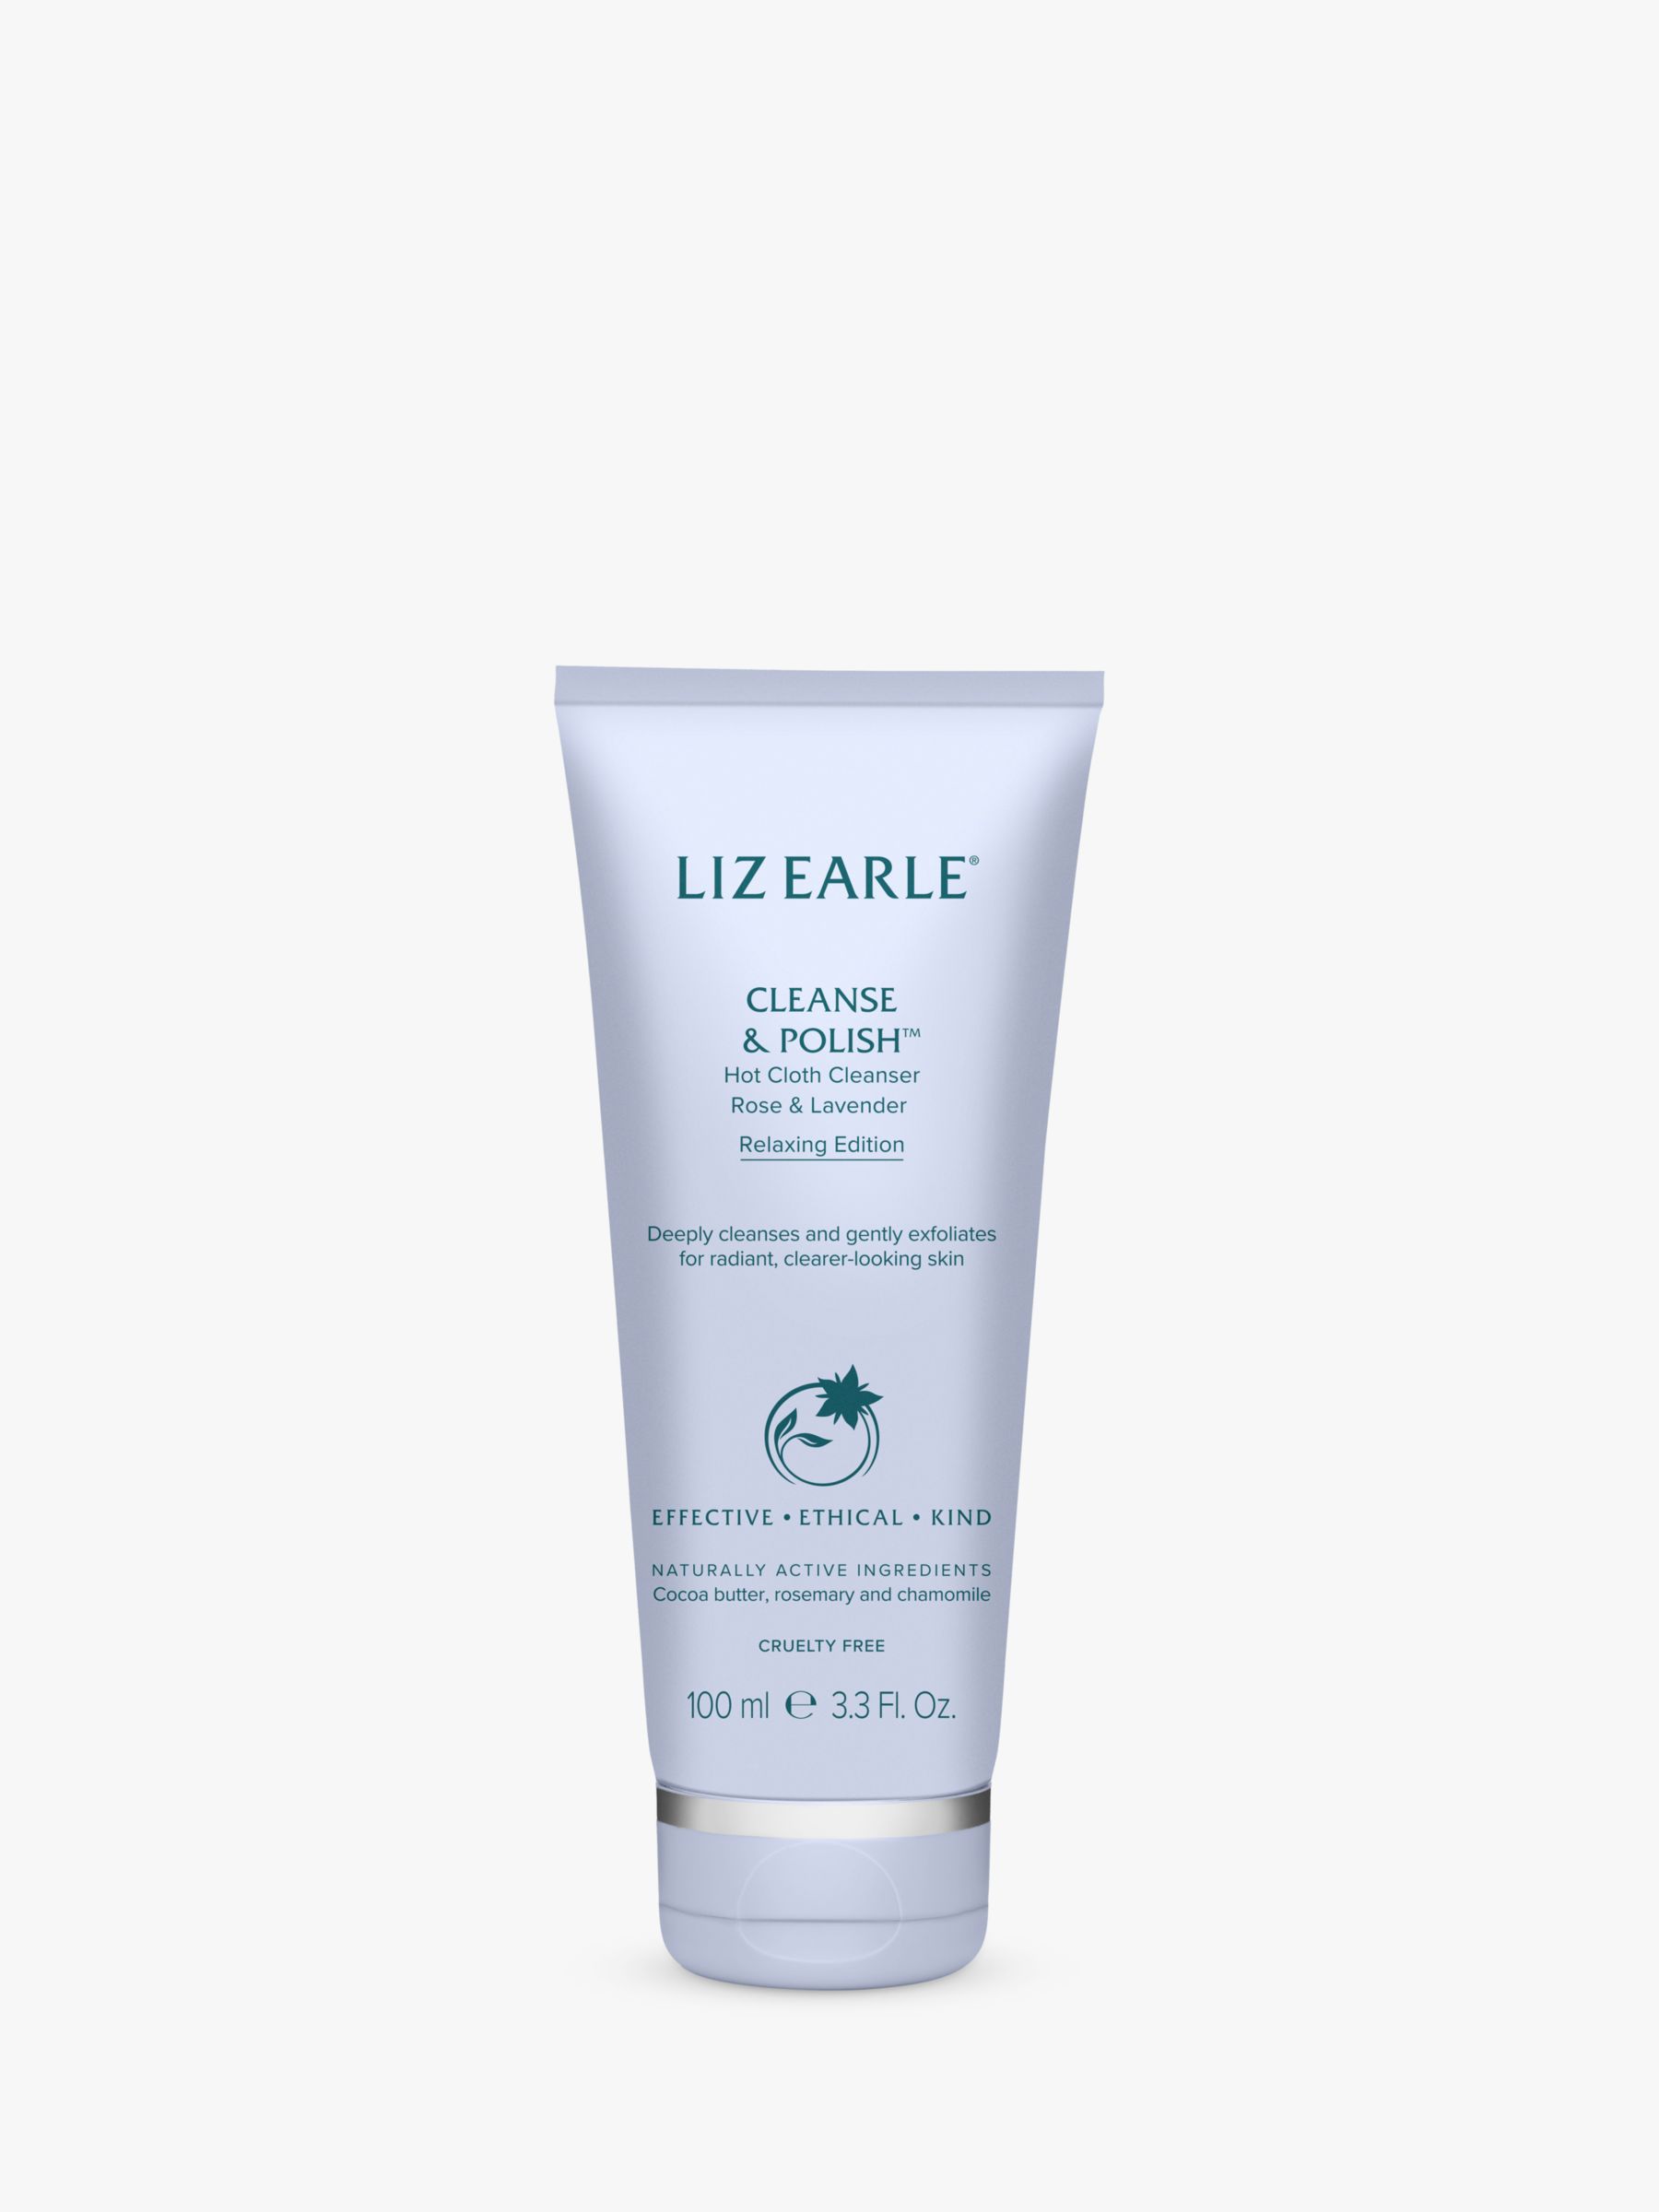 Liz Earle Cleanse & Polish™ Hot Cloth Cleanser Relaxing Edition, 100ml